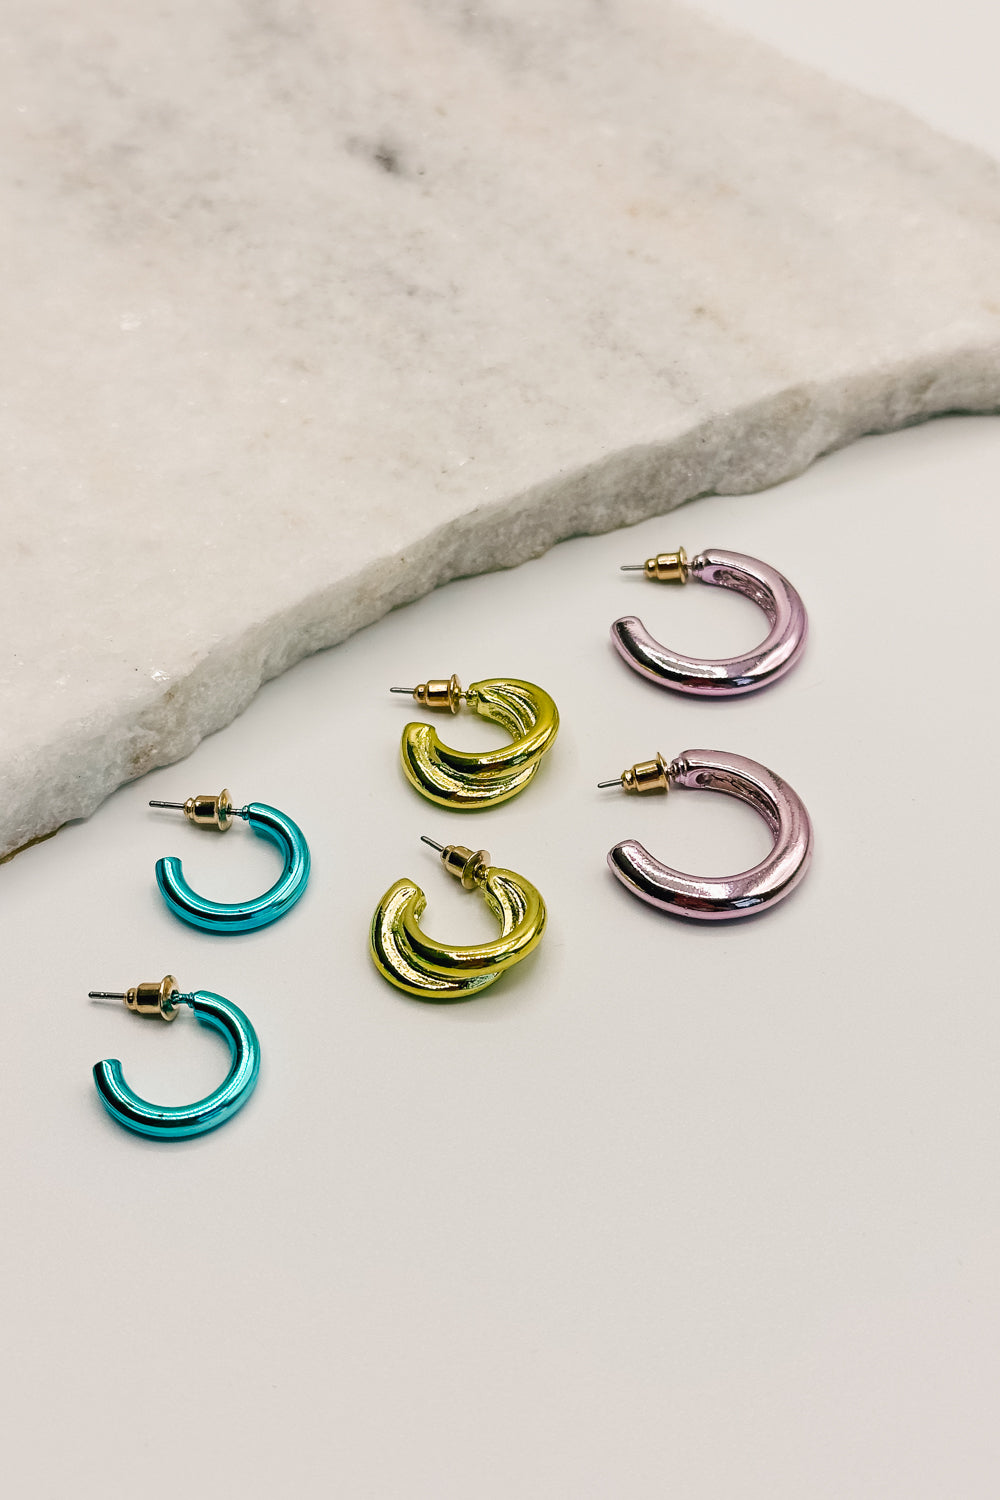 close up view of the Remi Multi Mini Hoops Earring Set which features small teal, lime green and medium size lavender open hoops